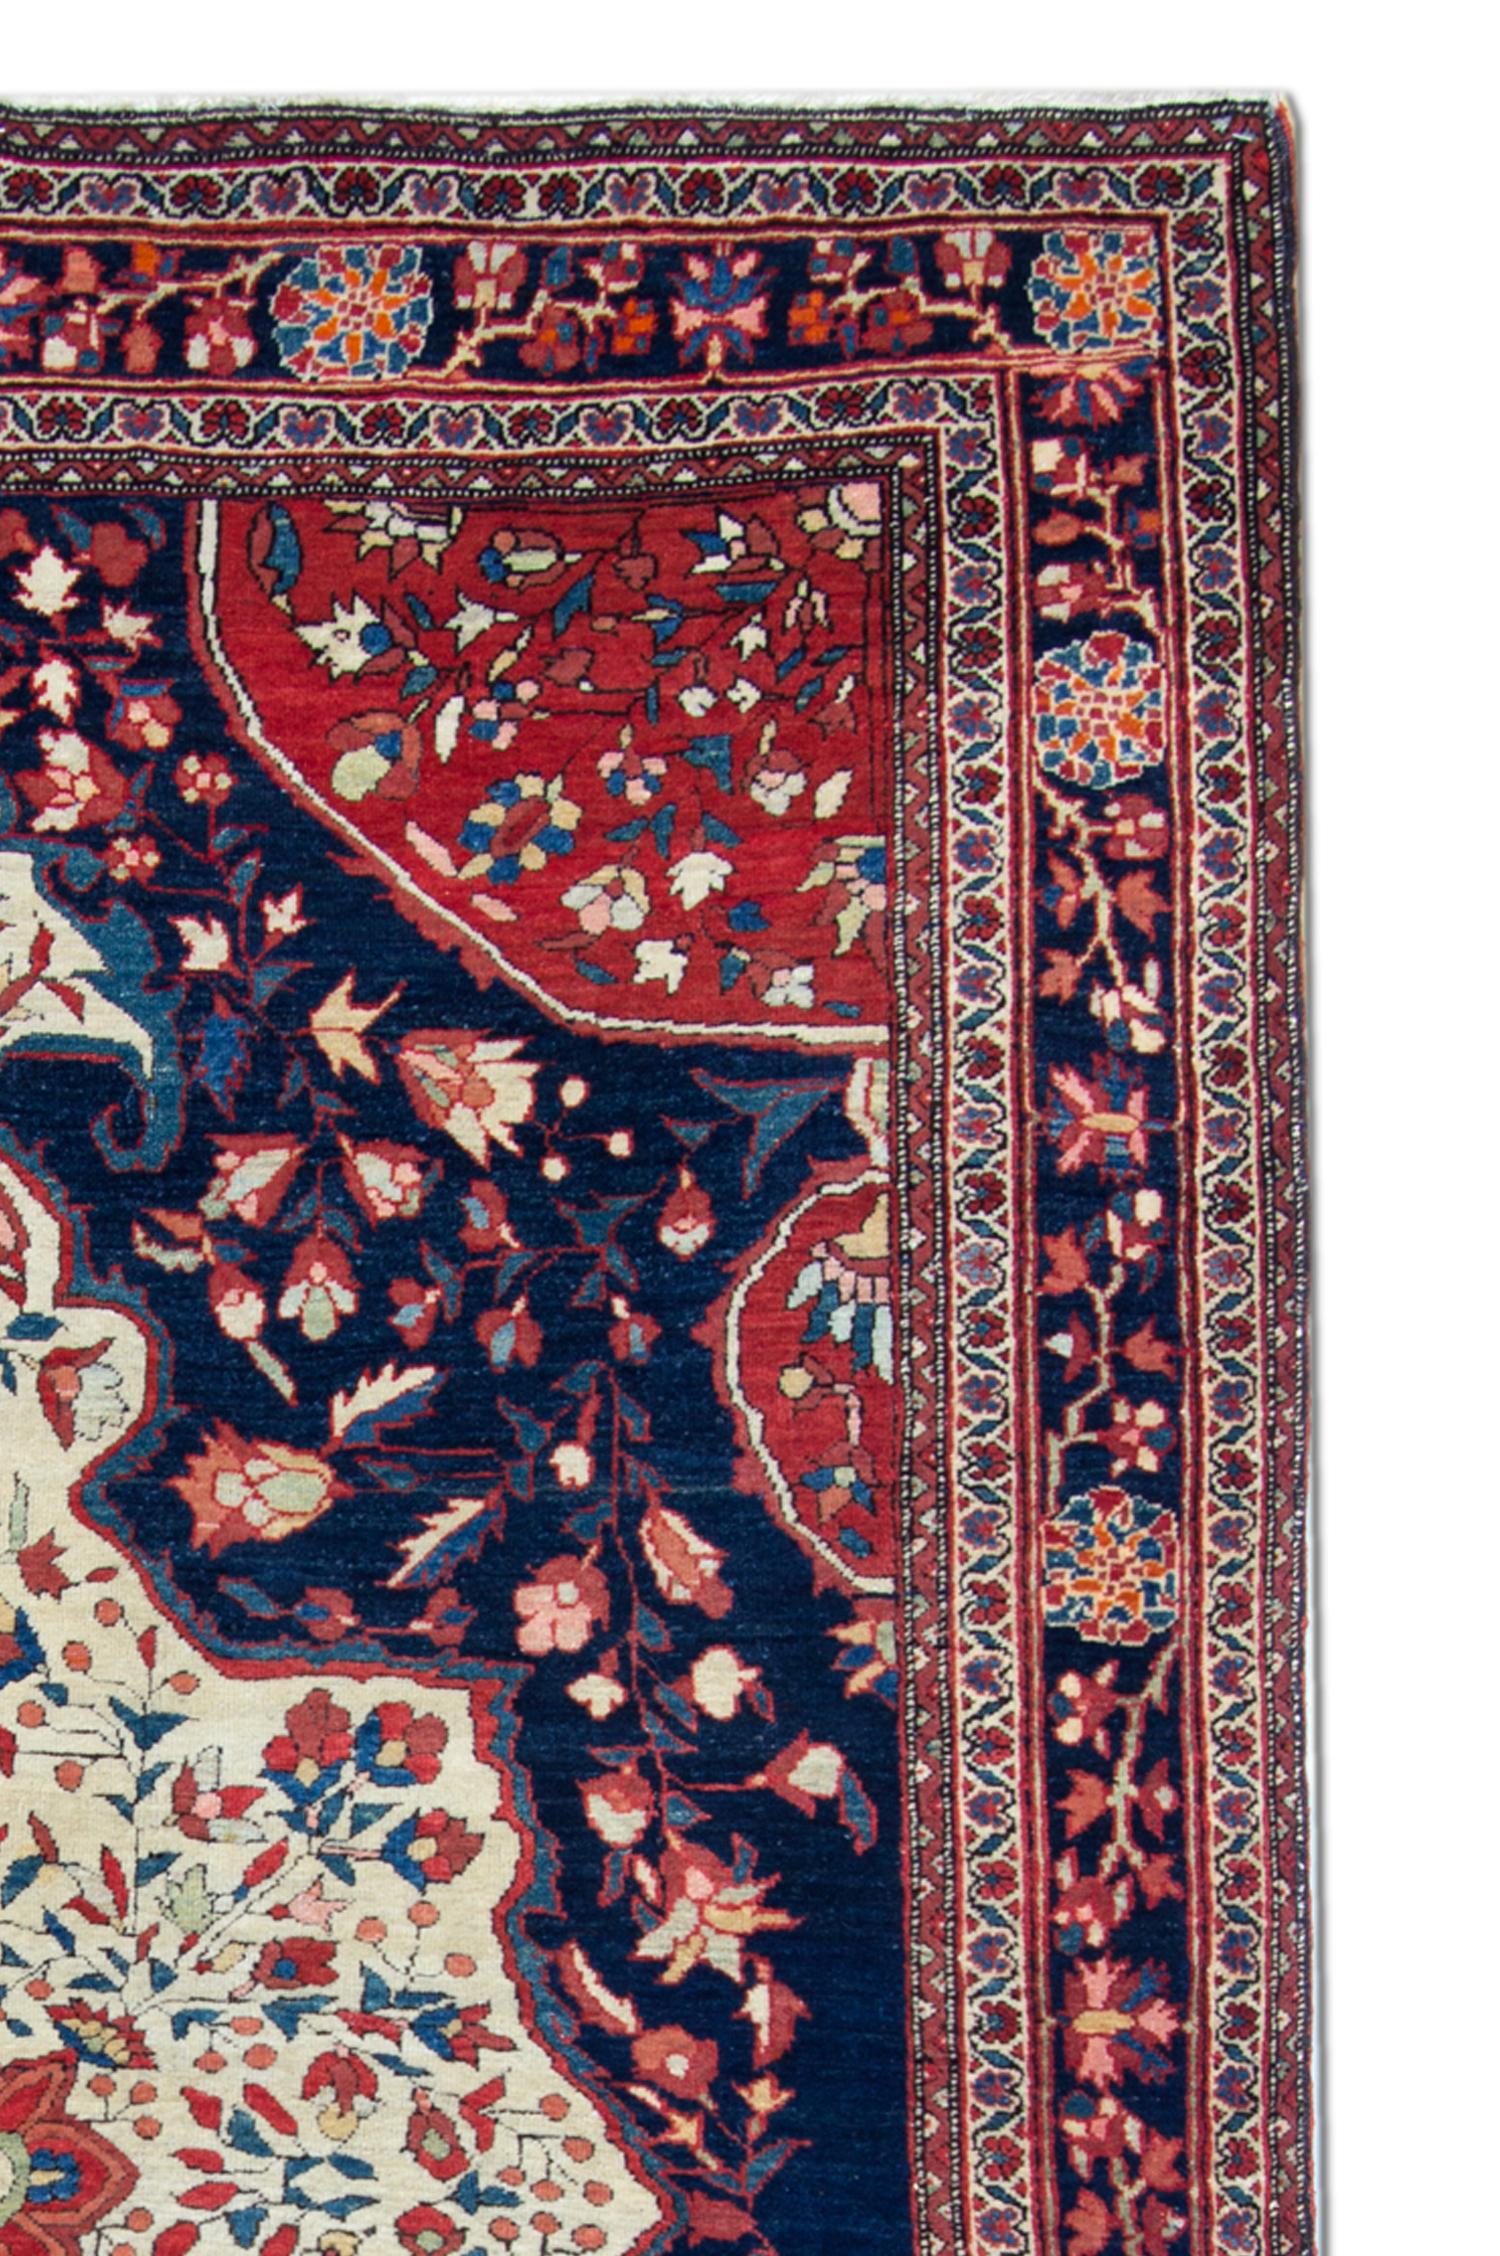 Azerbaijani Handmade Carpet Antique Rug Traditional Red Blue Wool Area Rug For Sale